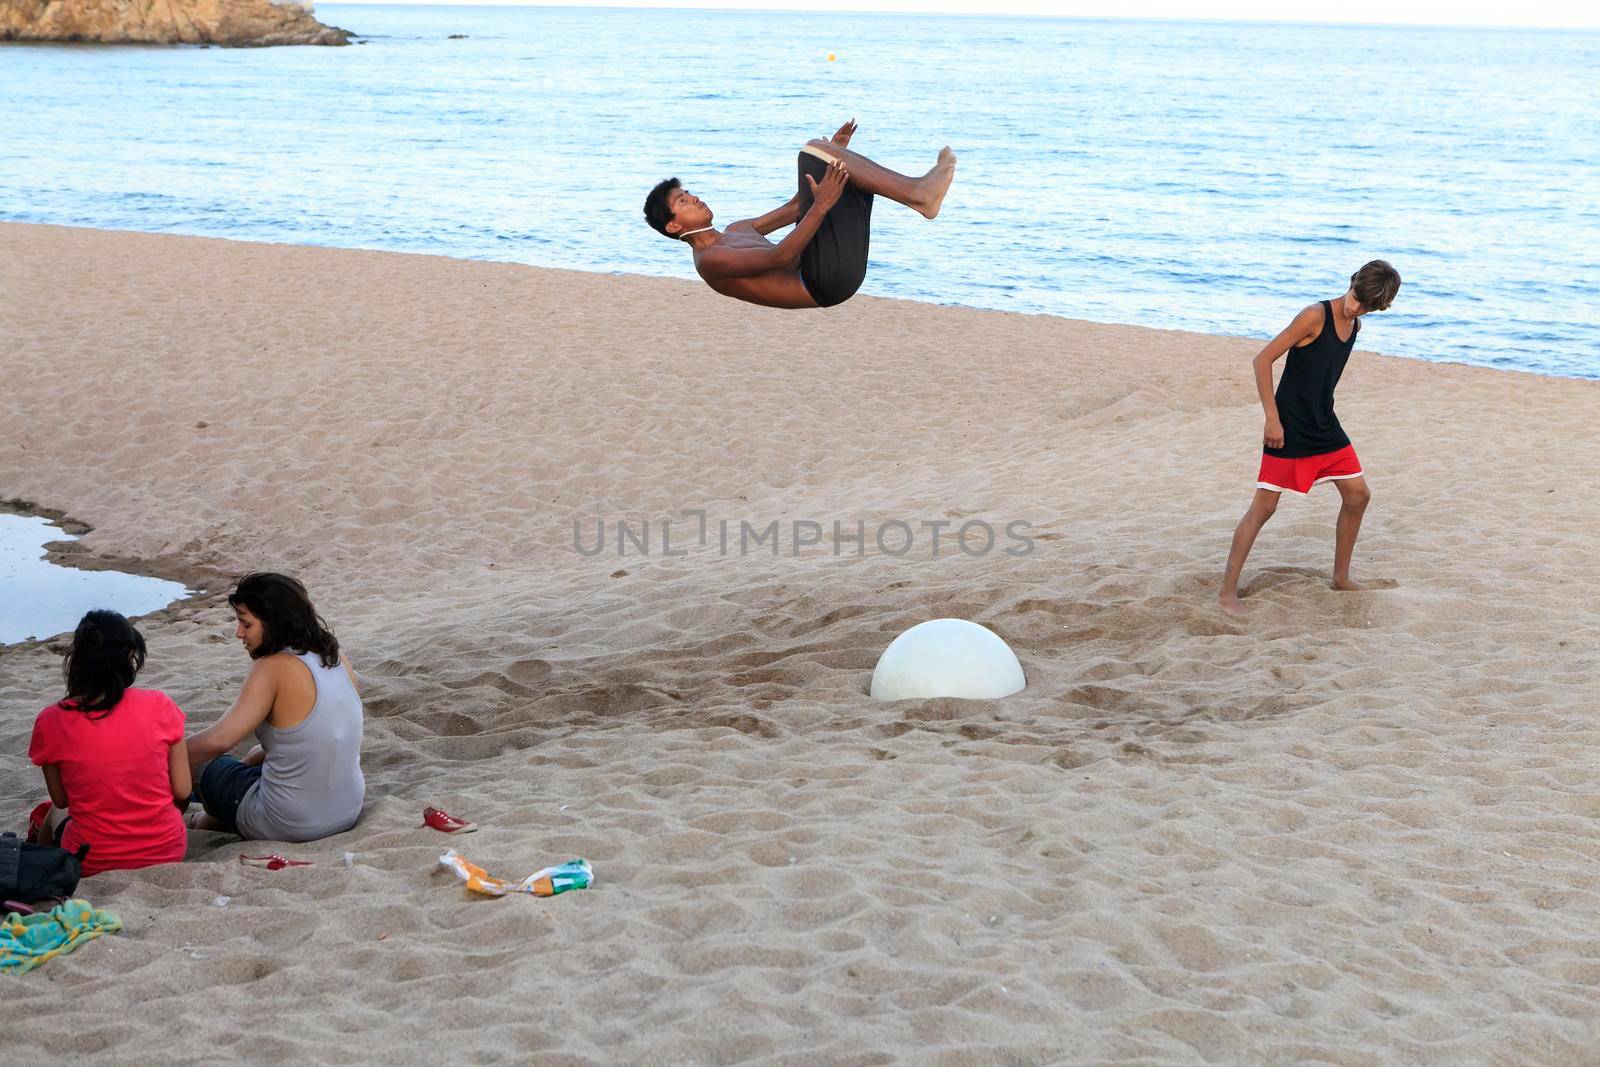 A young man is engaged in acrobatics on the beach. Somersault jump by elenarostunova